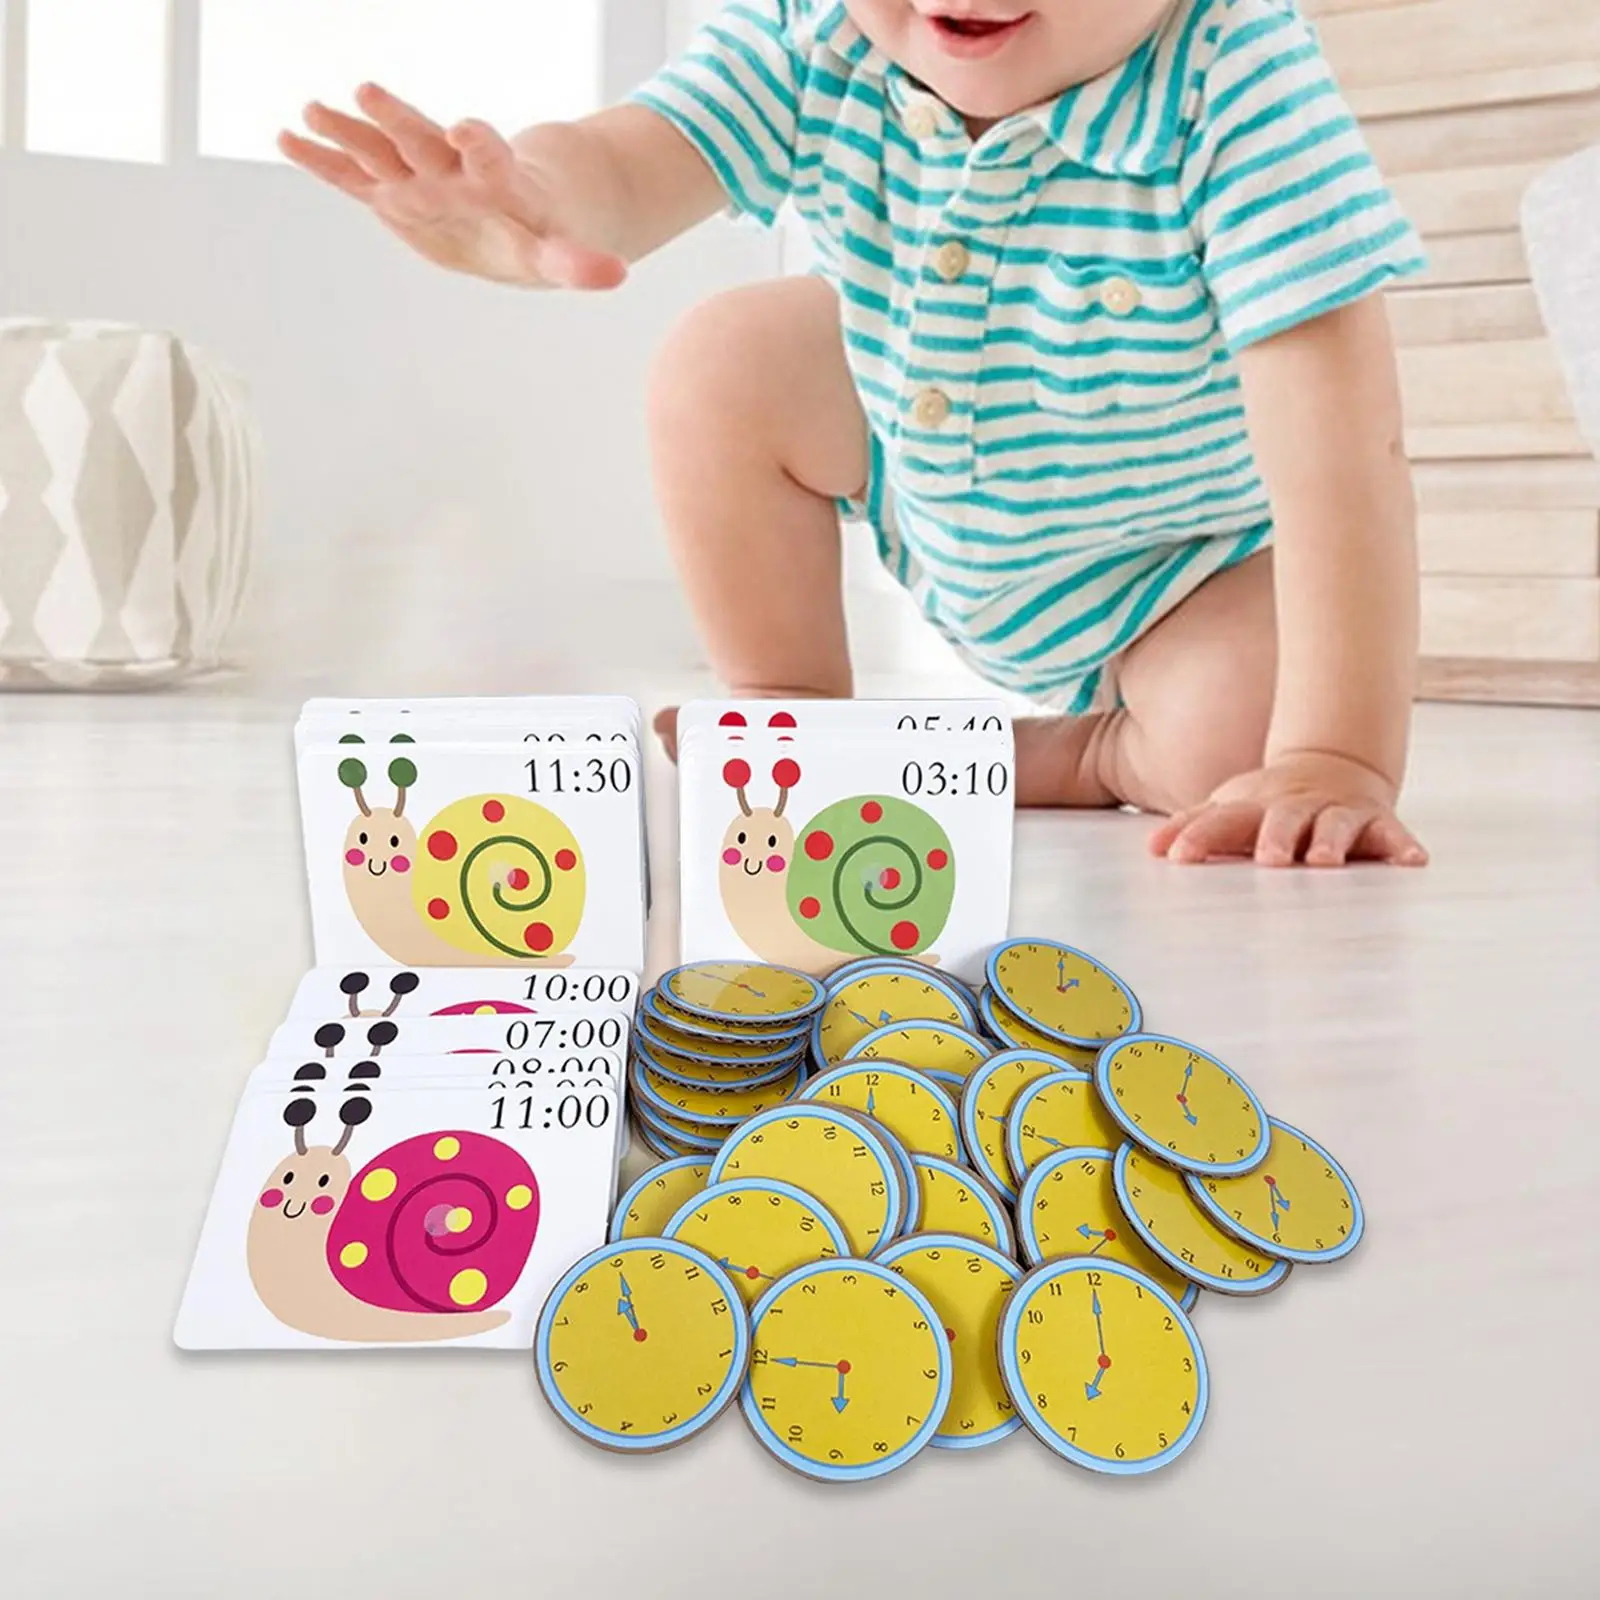 Children Montessori Teaching Clock Cards Time Learning Early Learning Toys